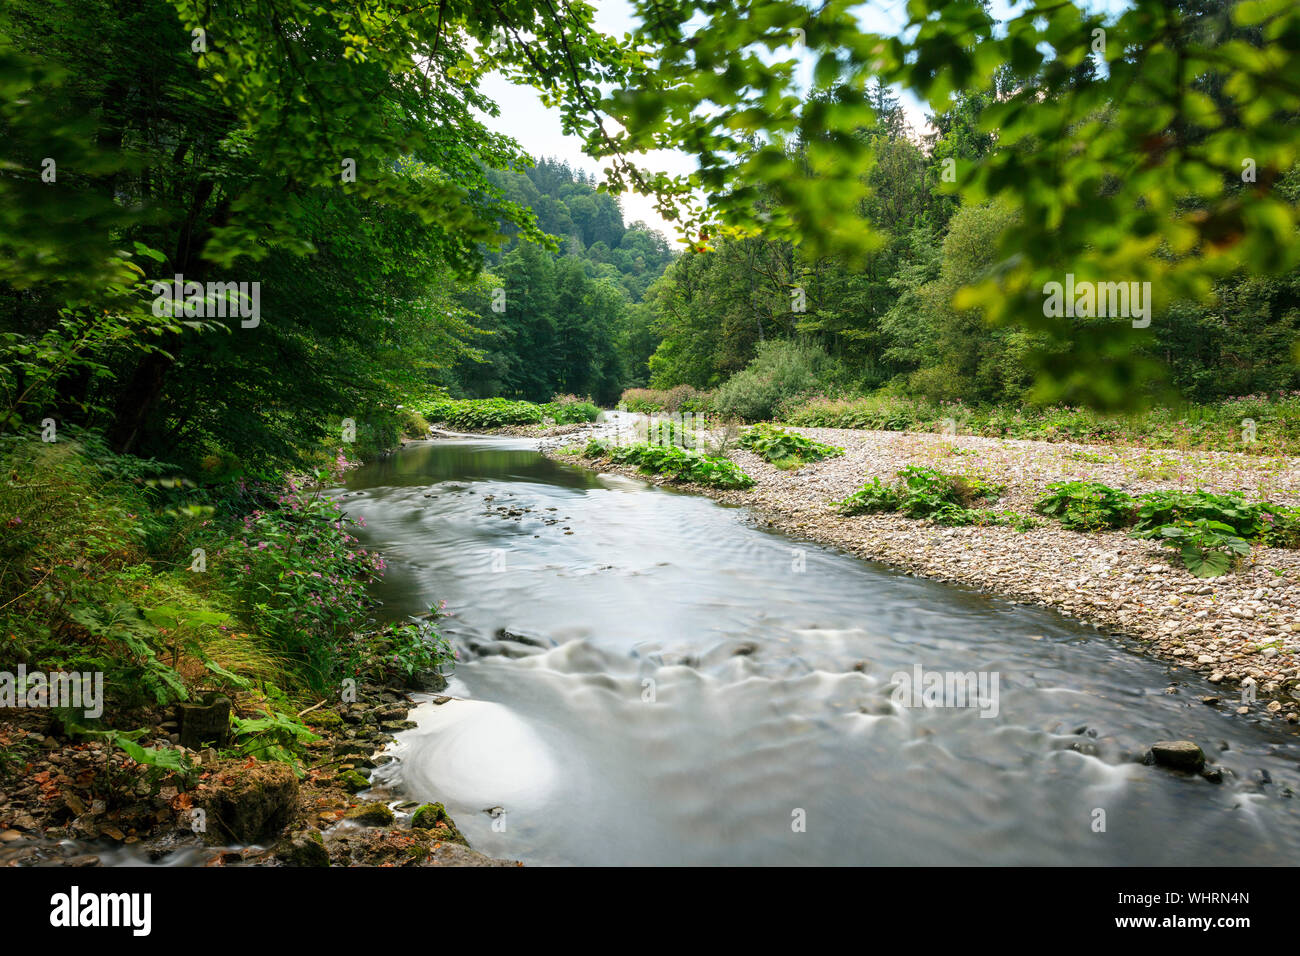 River Wutach in the Wutach Gorge, Black Forest, Baden-Württemberg, Germany Stock Photo